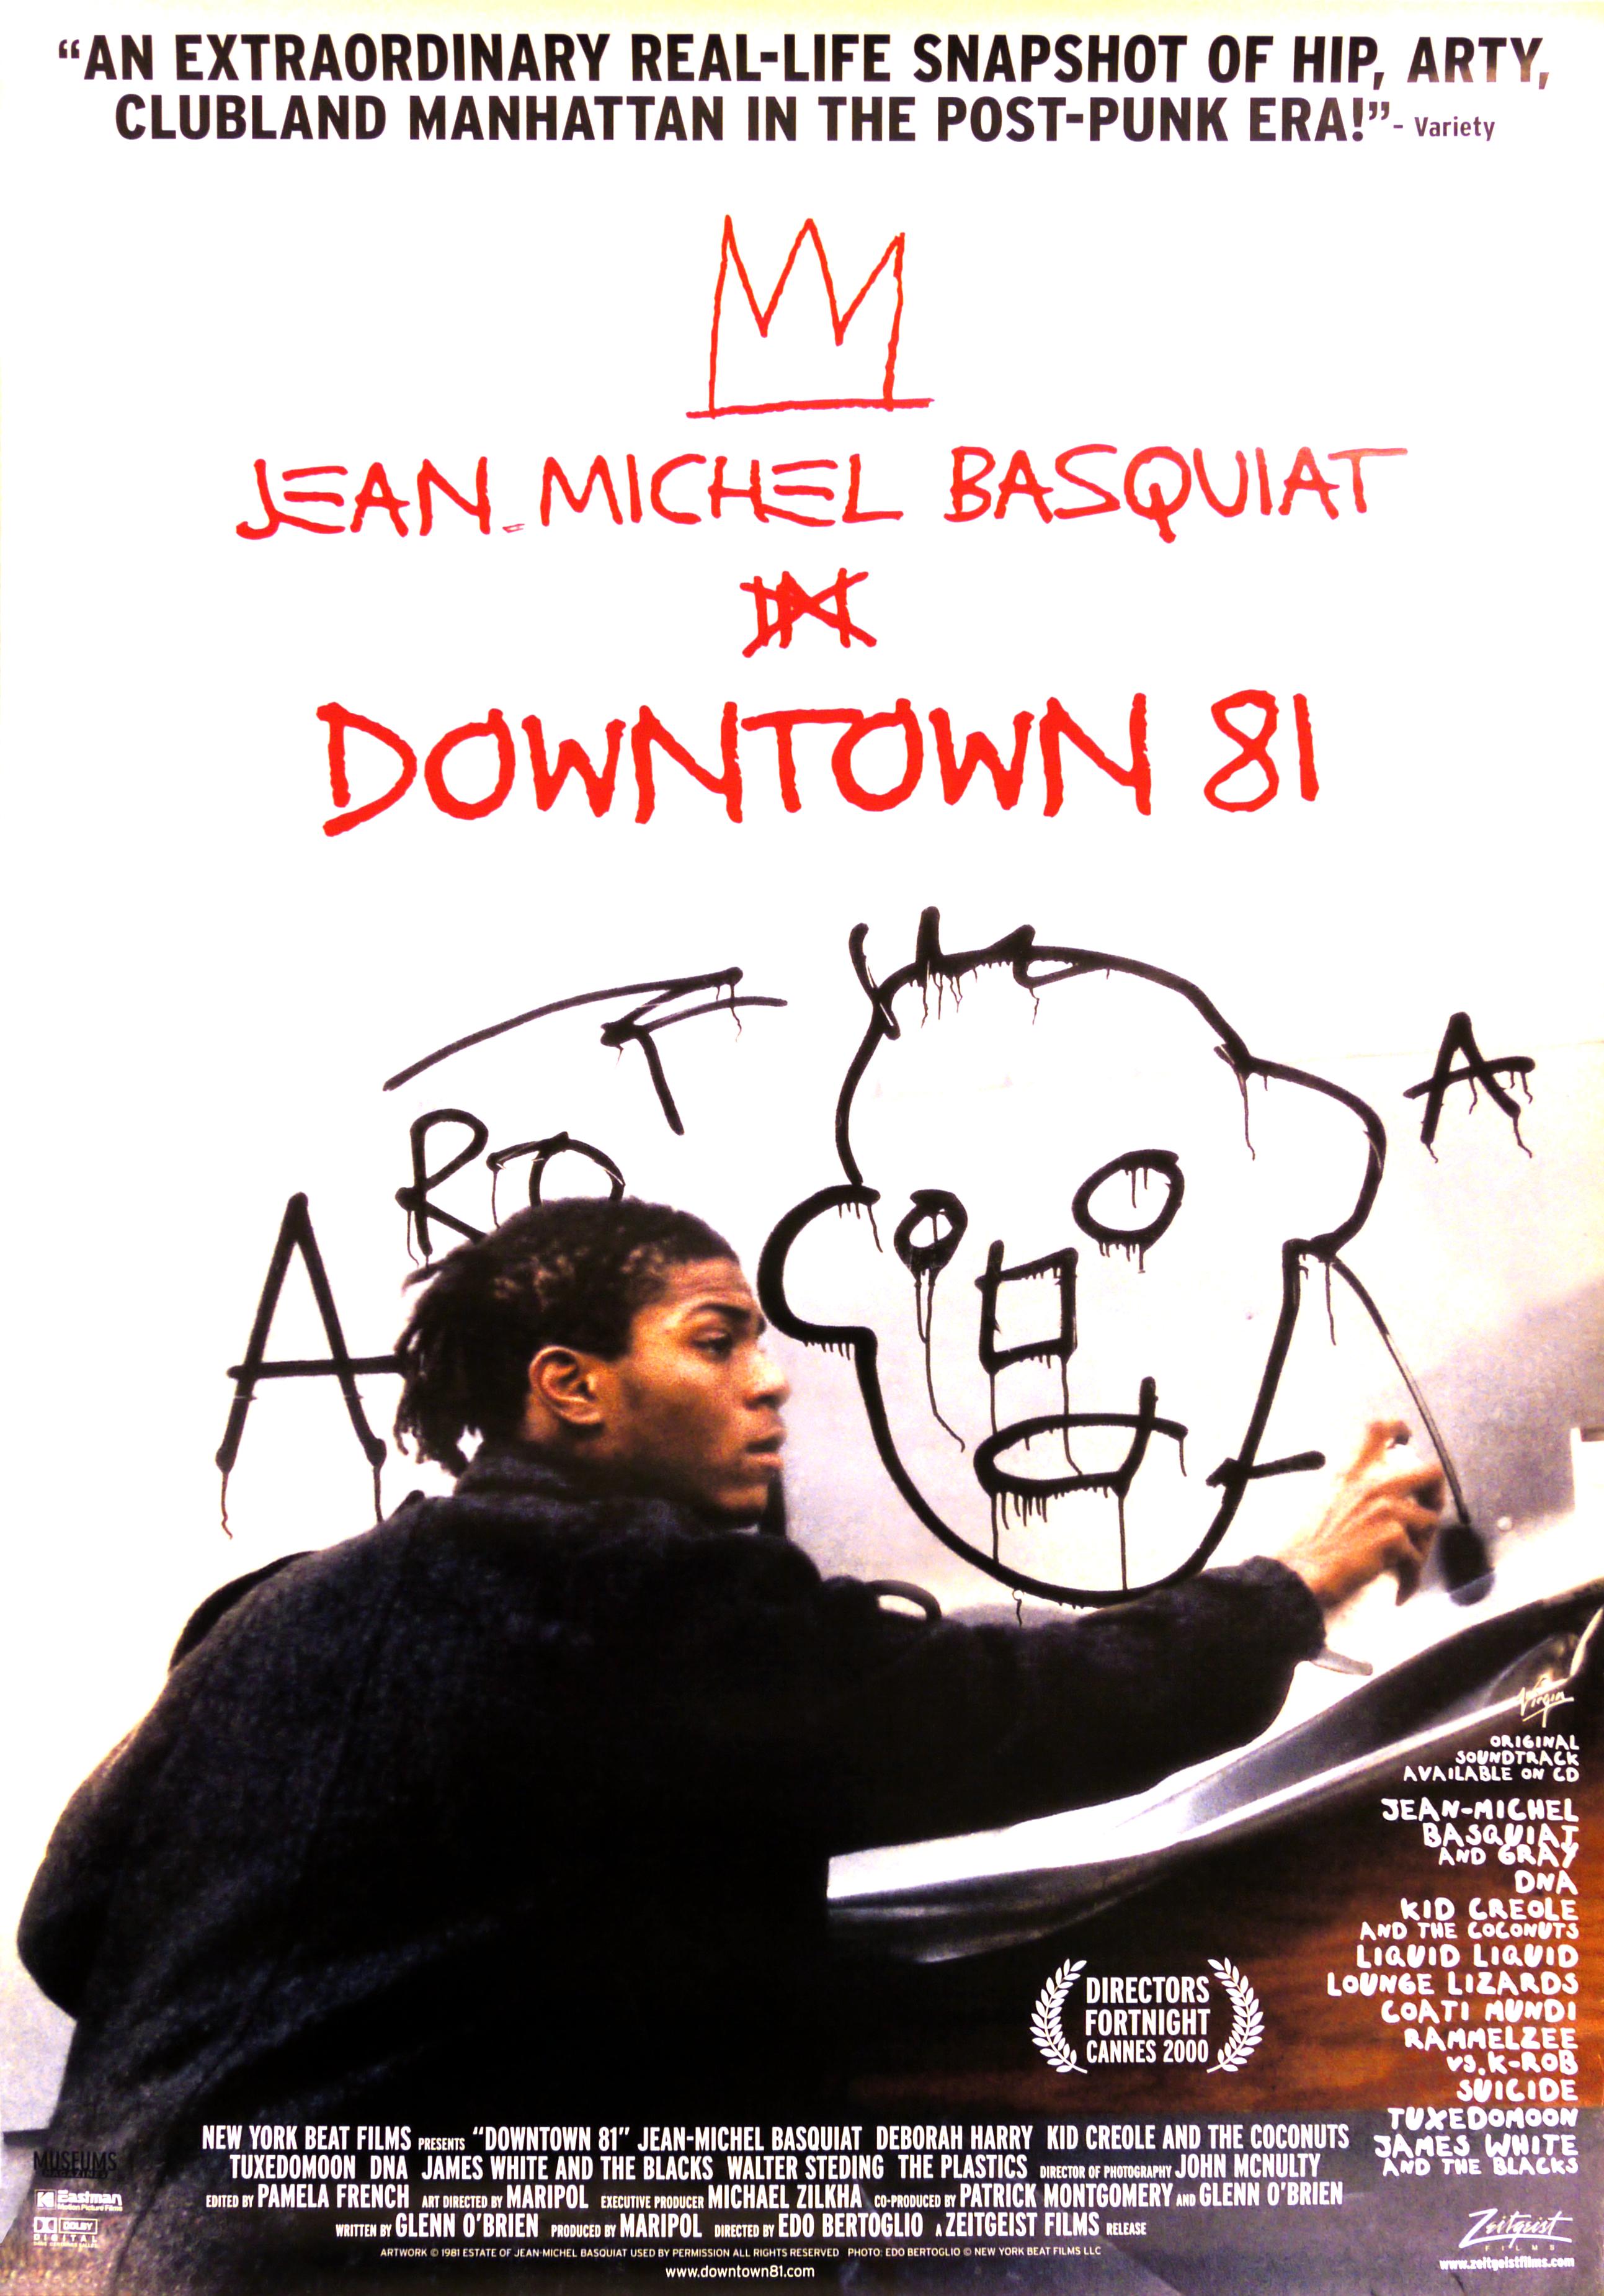 Basquiat Downtown 81 film poster  - Print by after Jean-Michel Basquiat